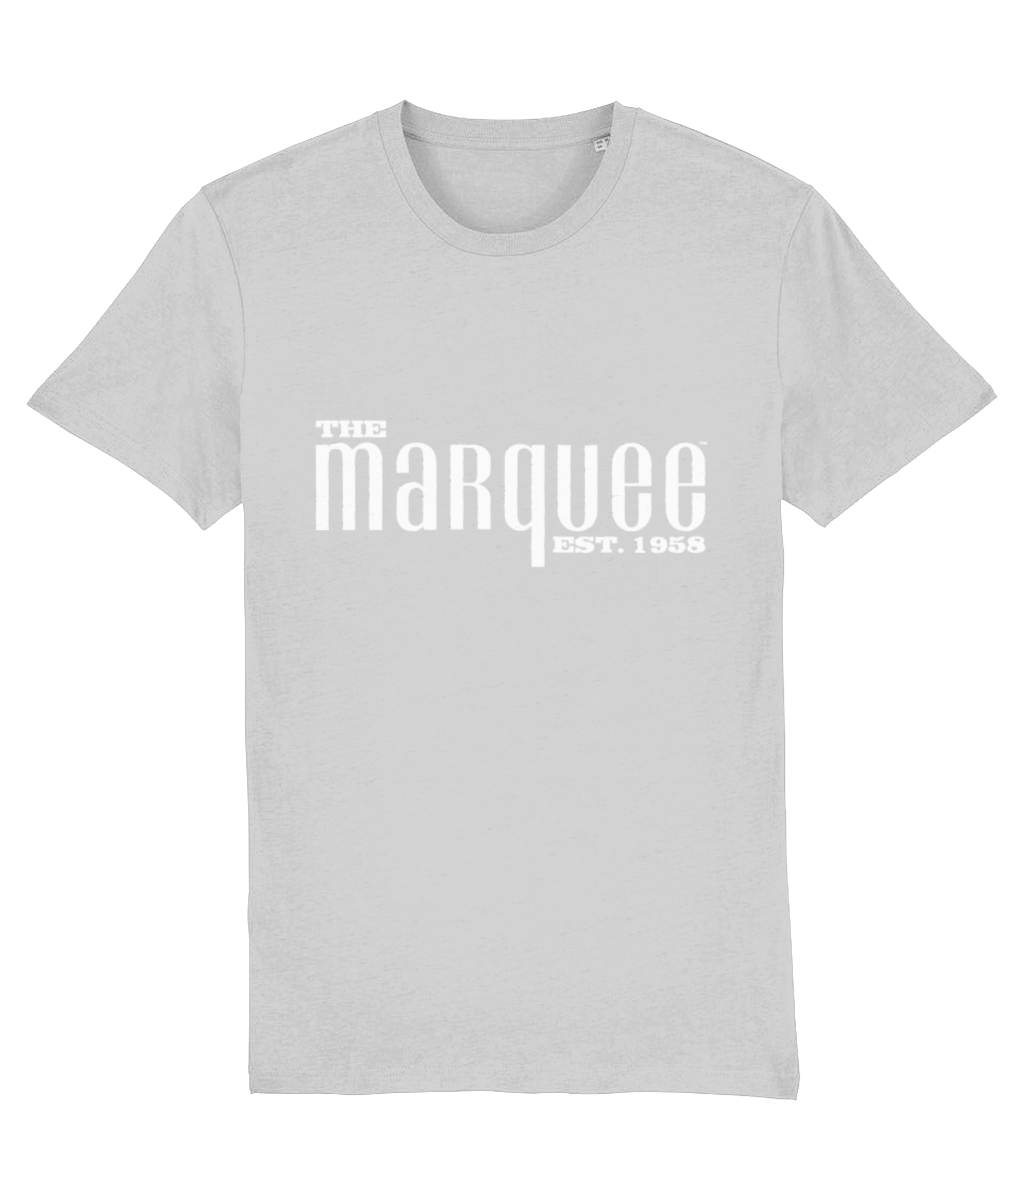 The Marquee T-Shirt